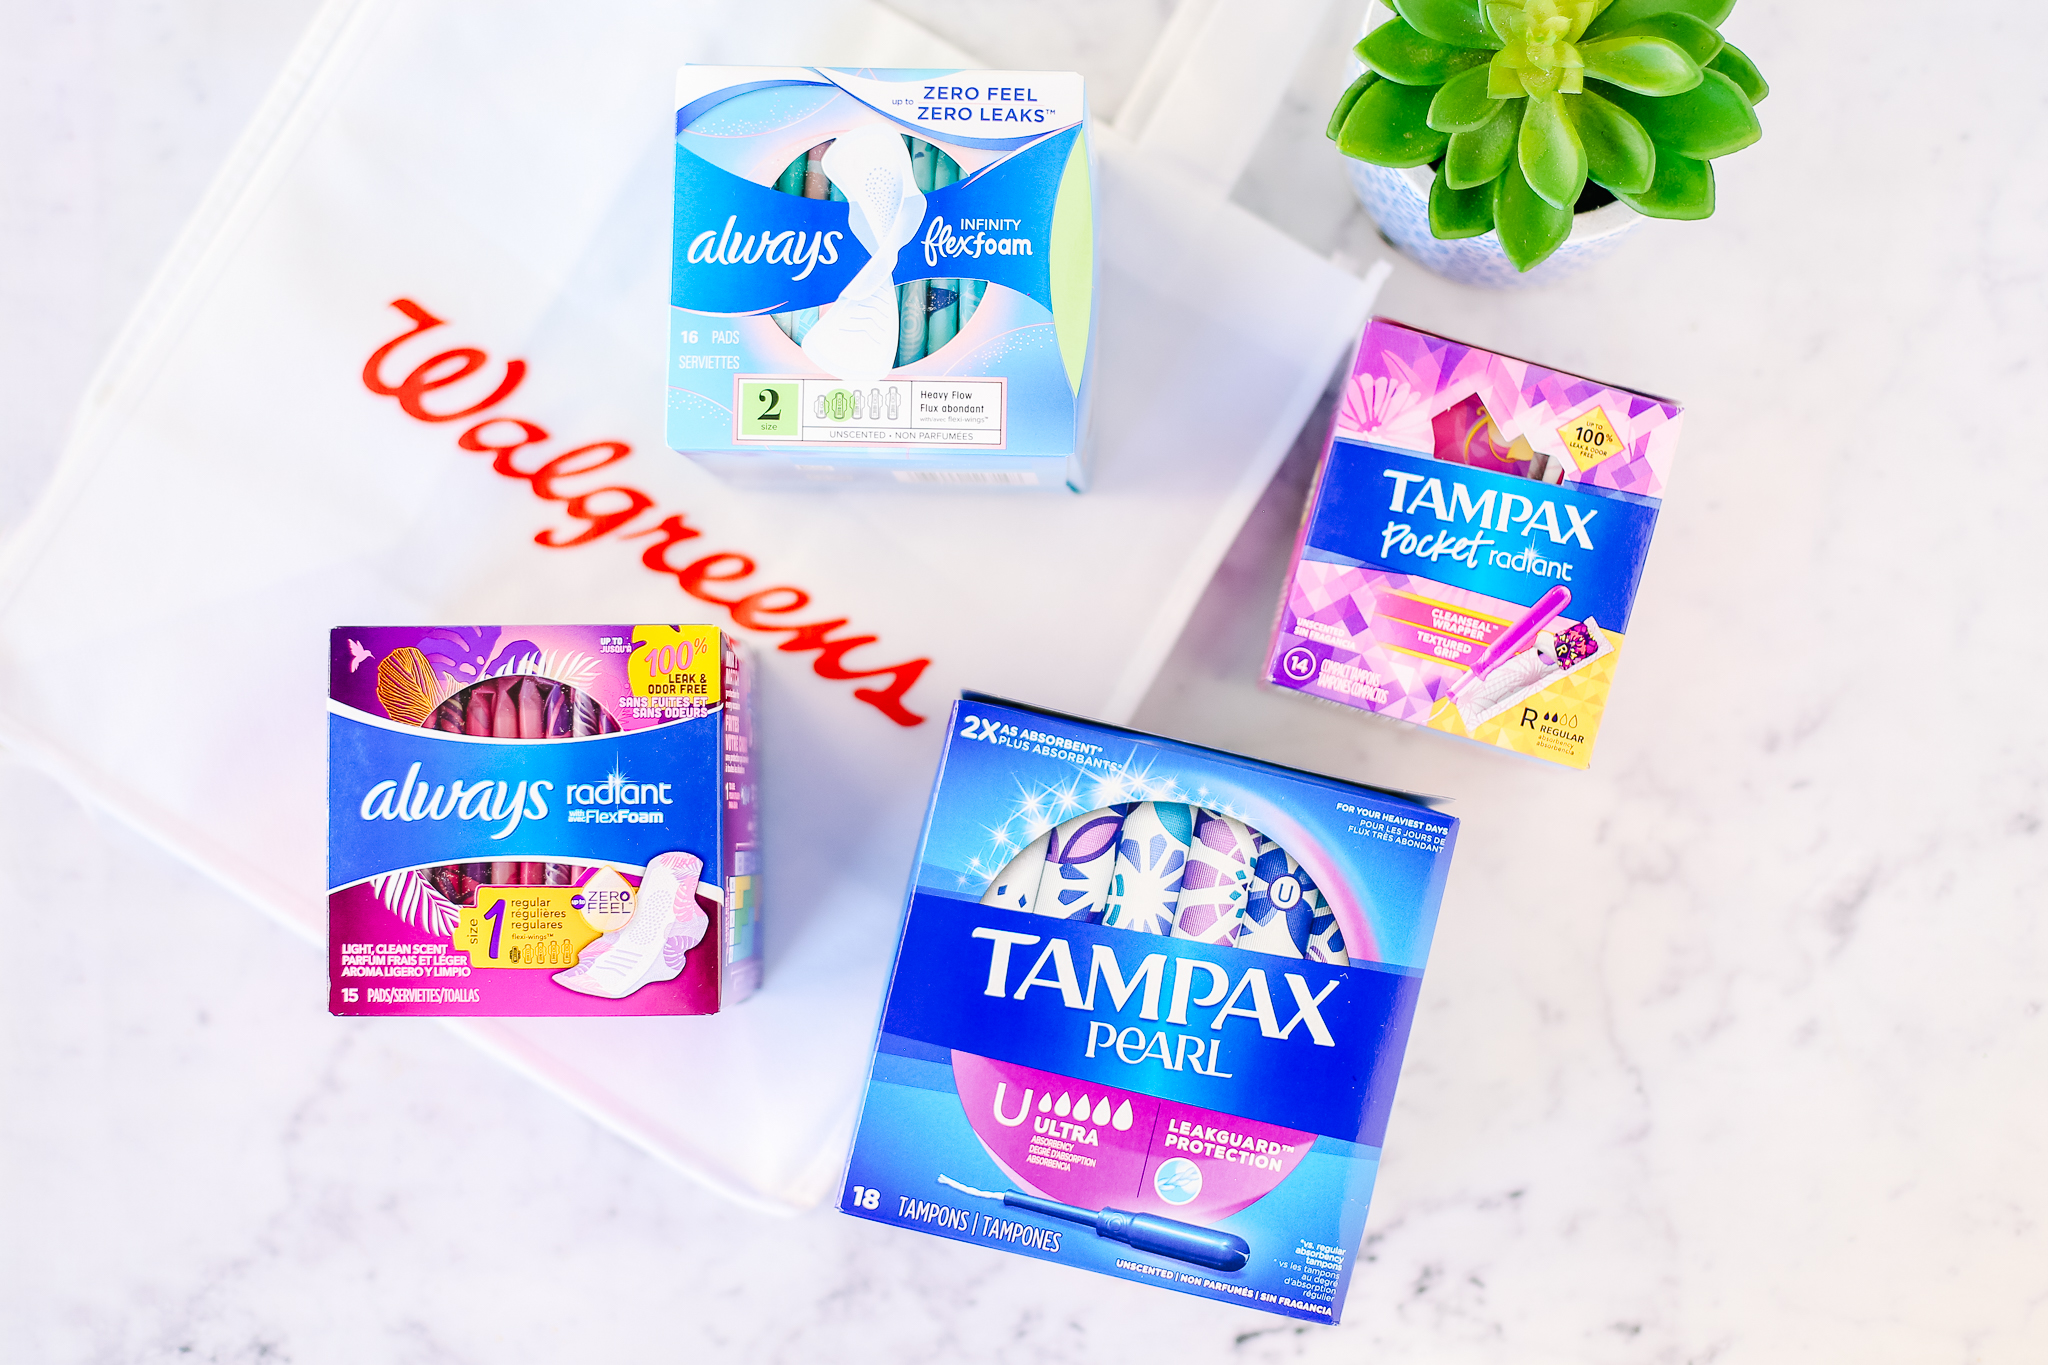 New Tampax Coupon and Always Coupon